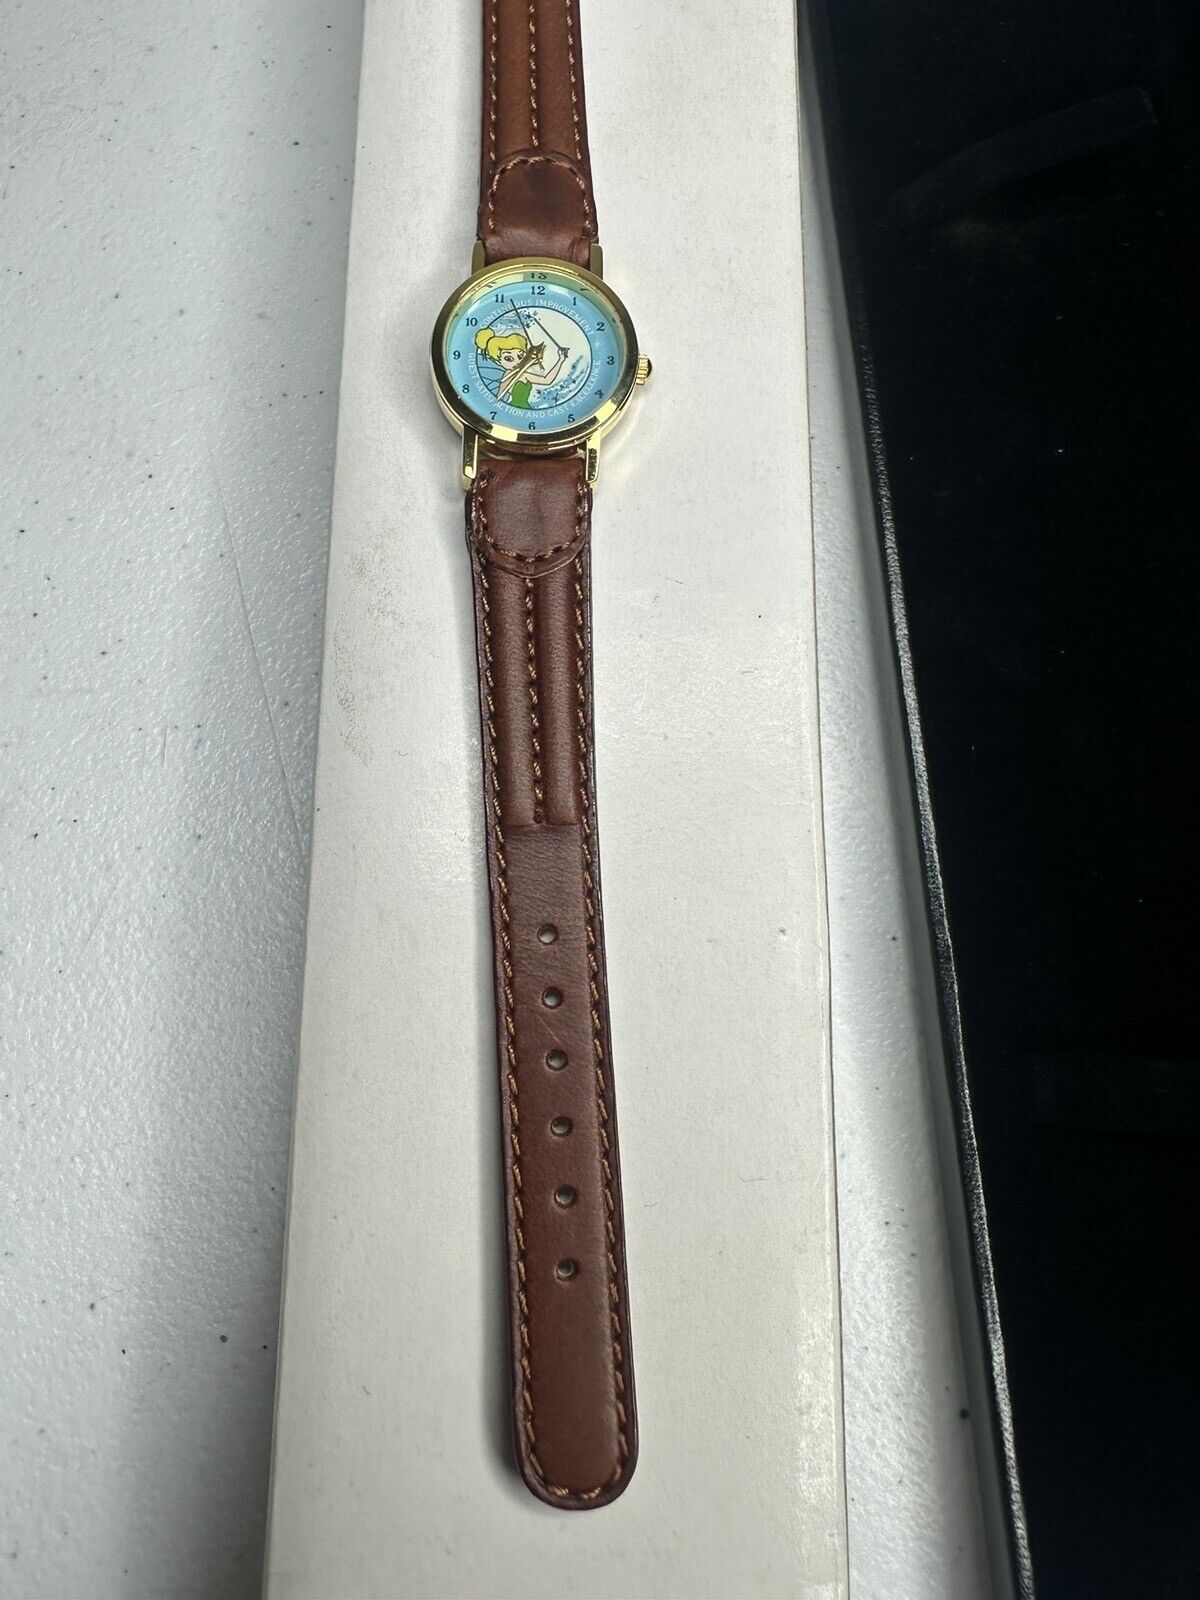 Disney Vintage-Inspired Tinkerbell Graphic Watch with Leather Strap - Collector's Timepiece - TreasuTiques